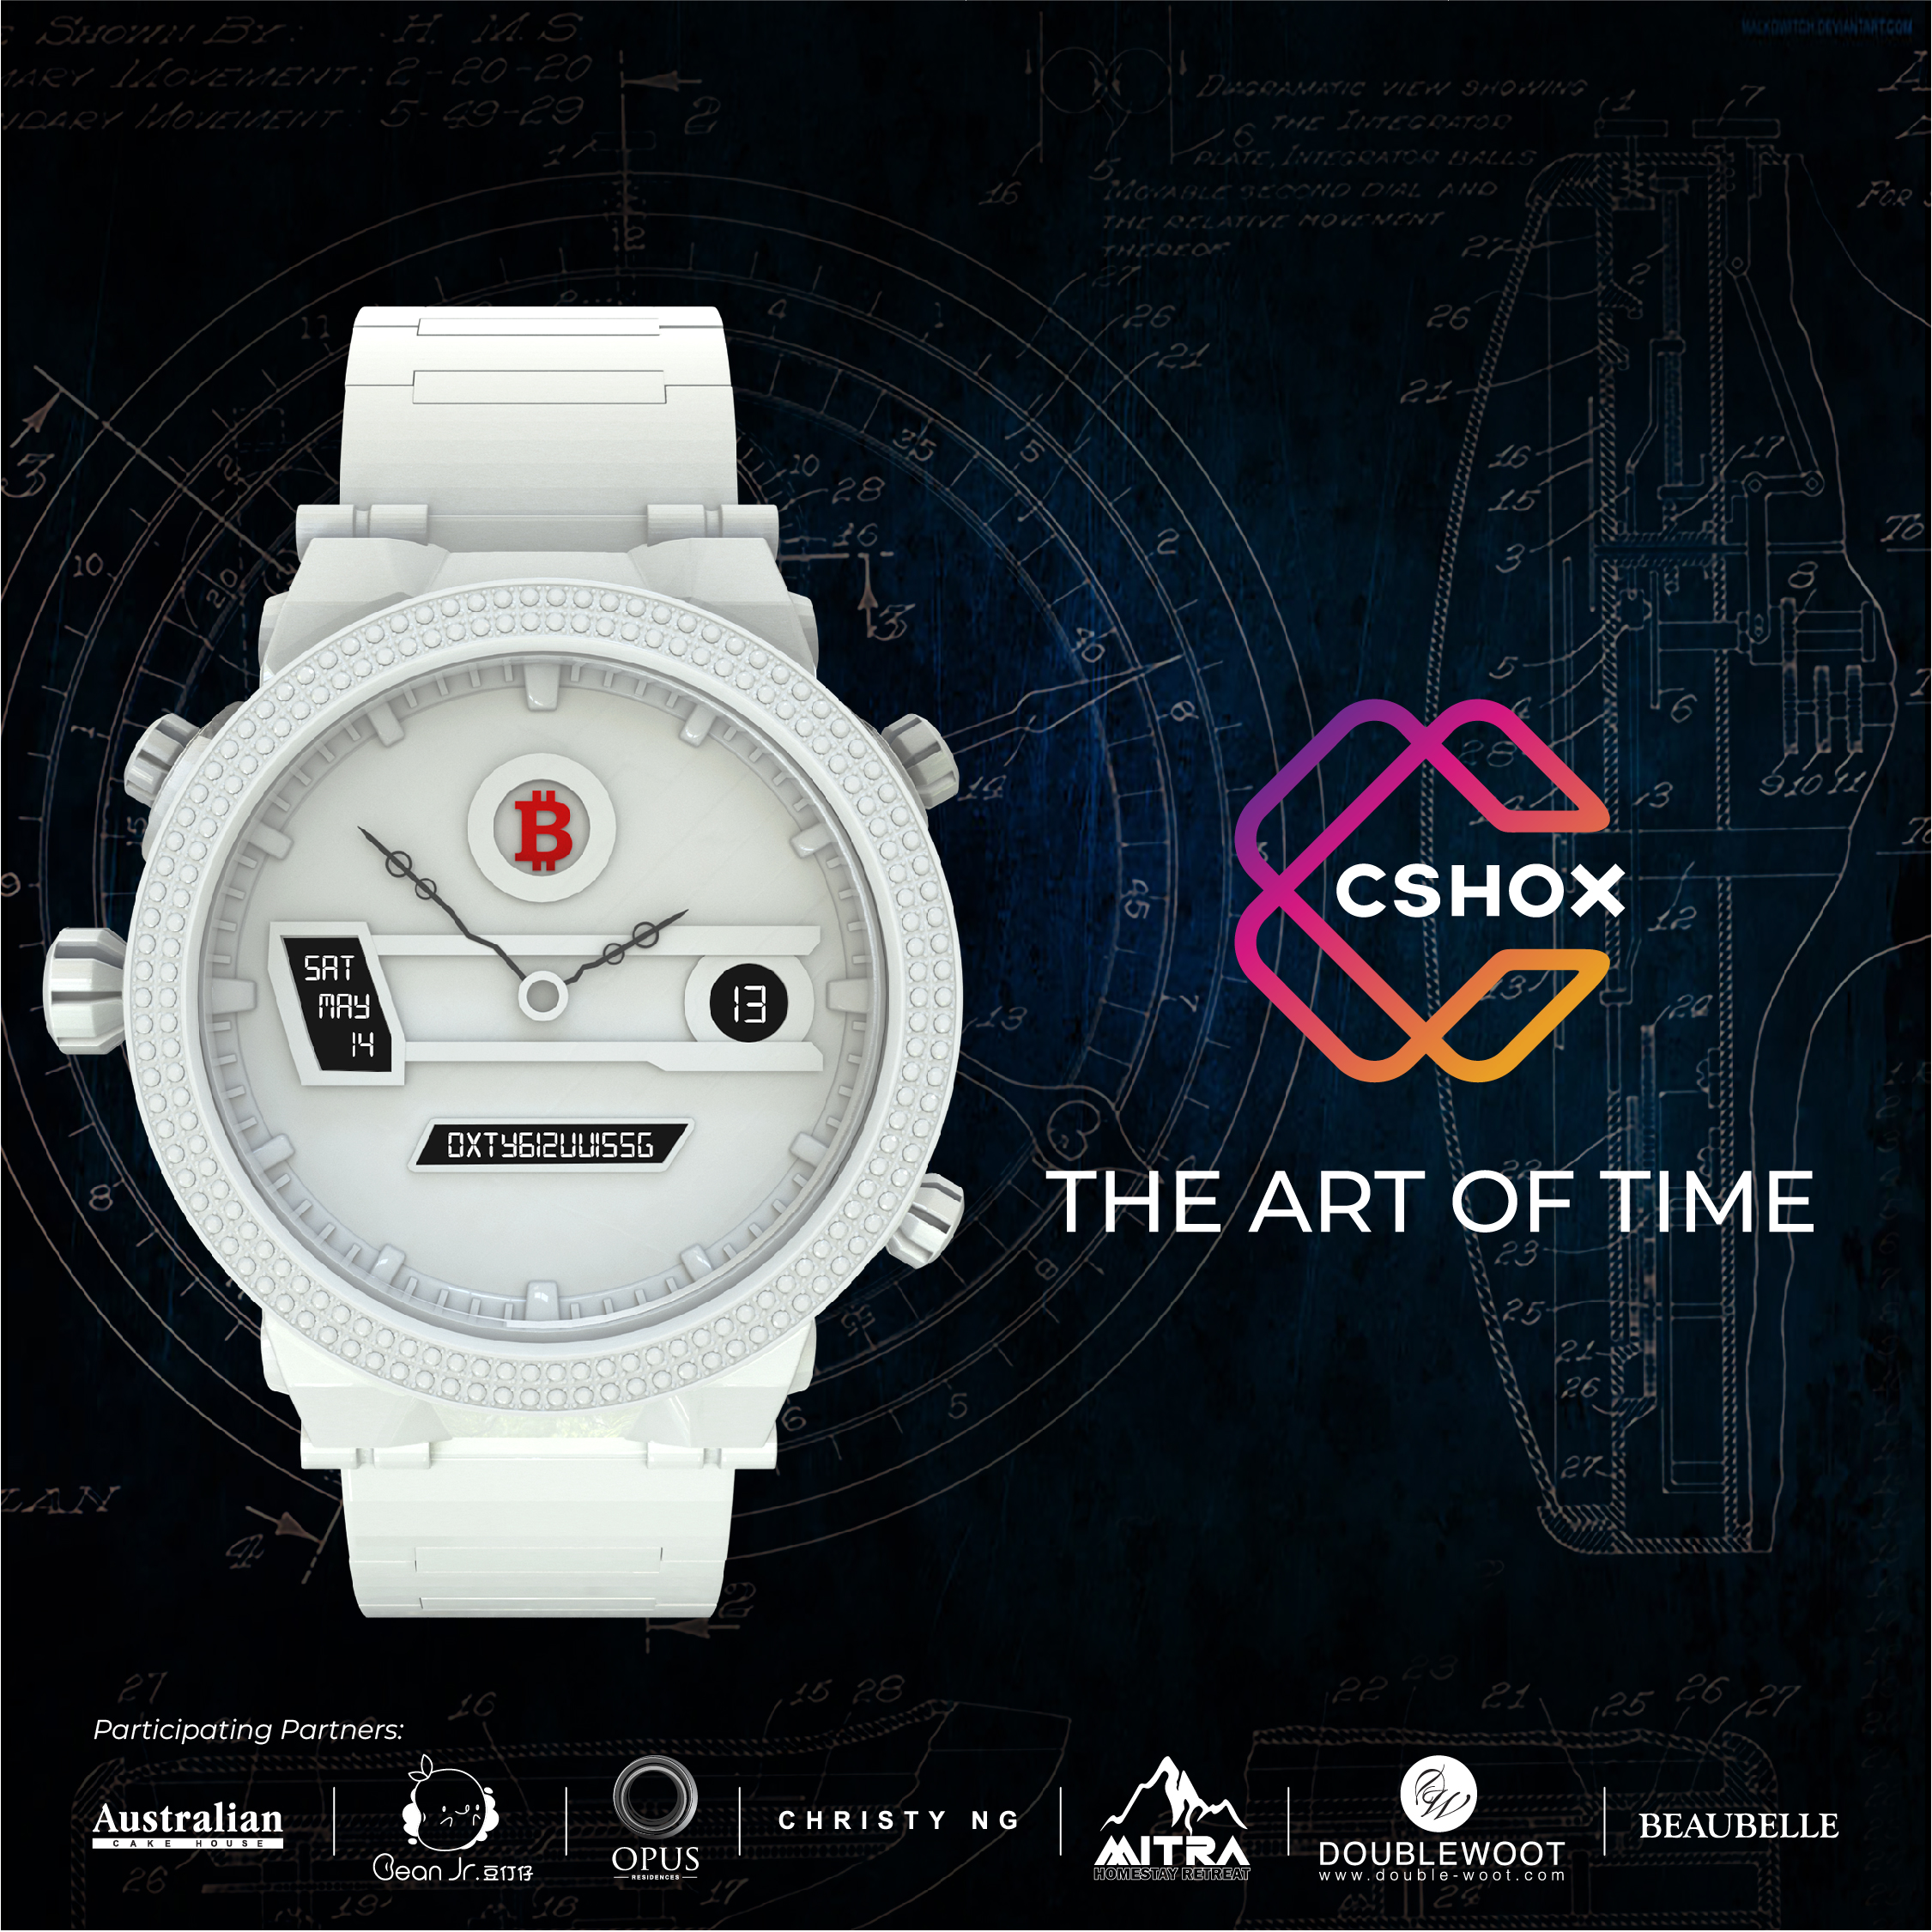 Malaysian project cshox brings a unique, functional nft timepiece into the metaverse | weirdkaya